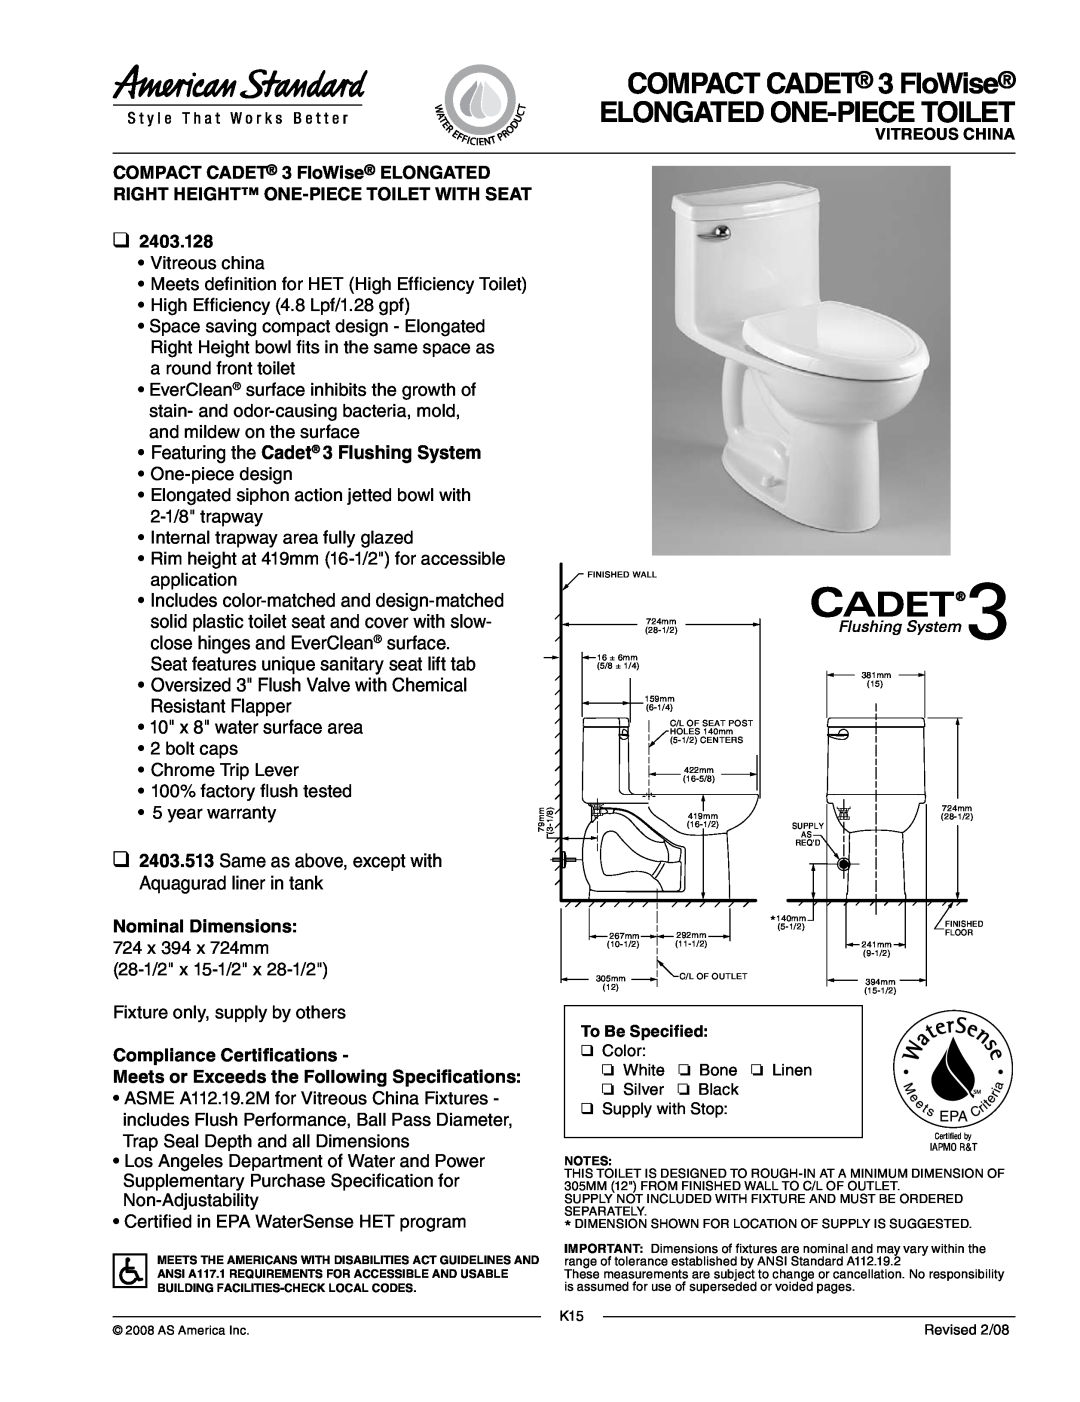 American Standard 2403.128 warranty COMPACT CADET 3 FloWise ELONGATED ONE-PIECETOILET, close hinges and EverClean surface 